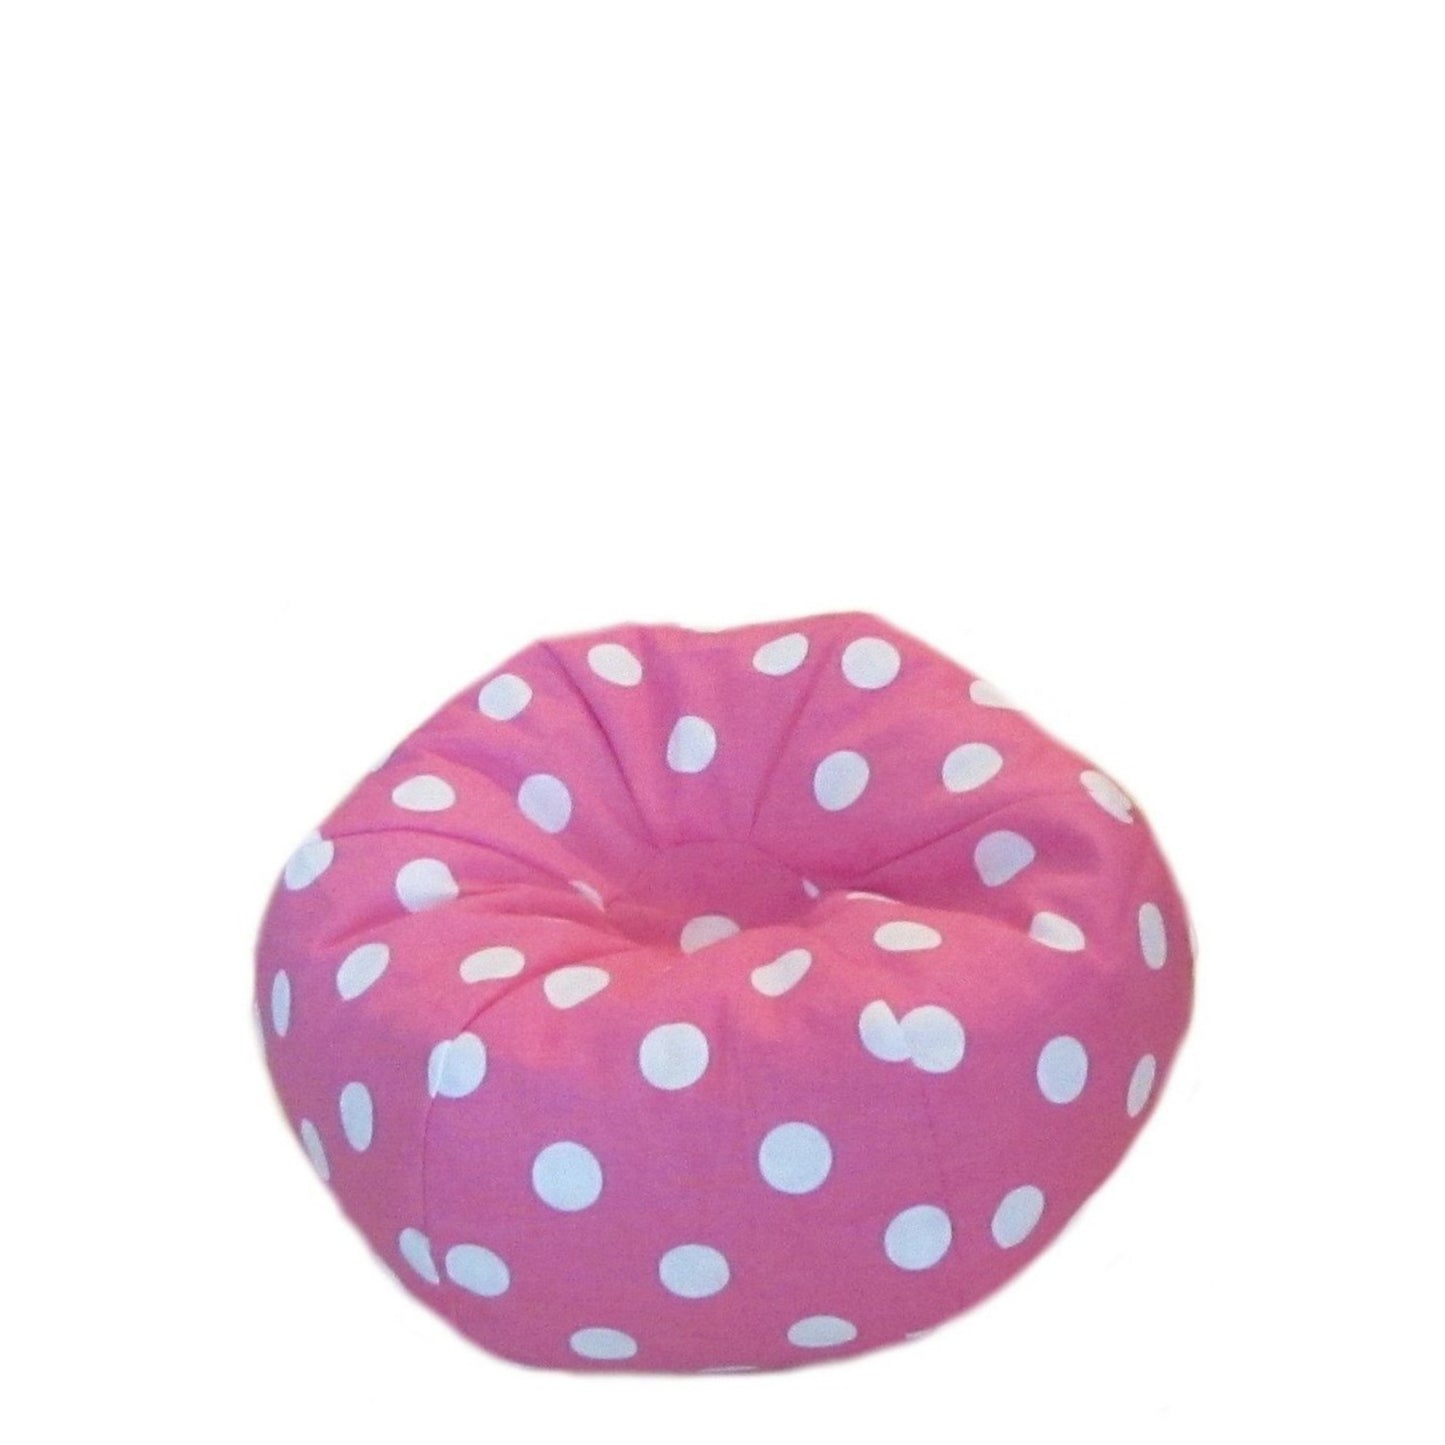 White Large Dots Pink Doll Bean Bag Chair for 18-inch dolls without doll